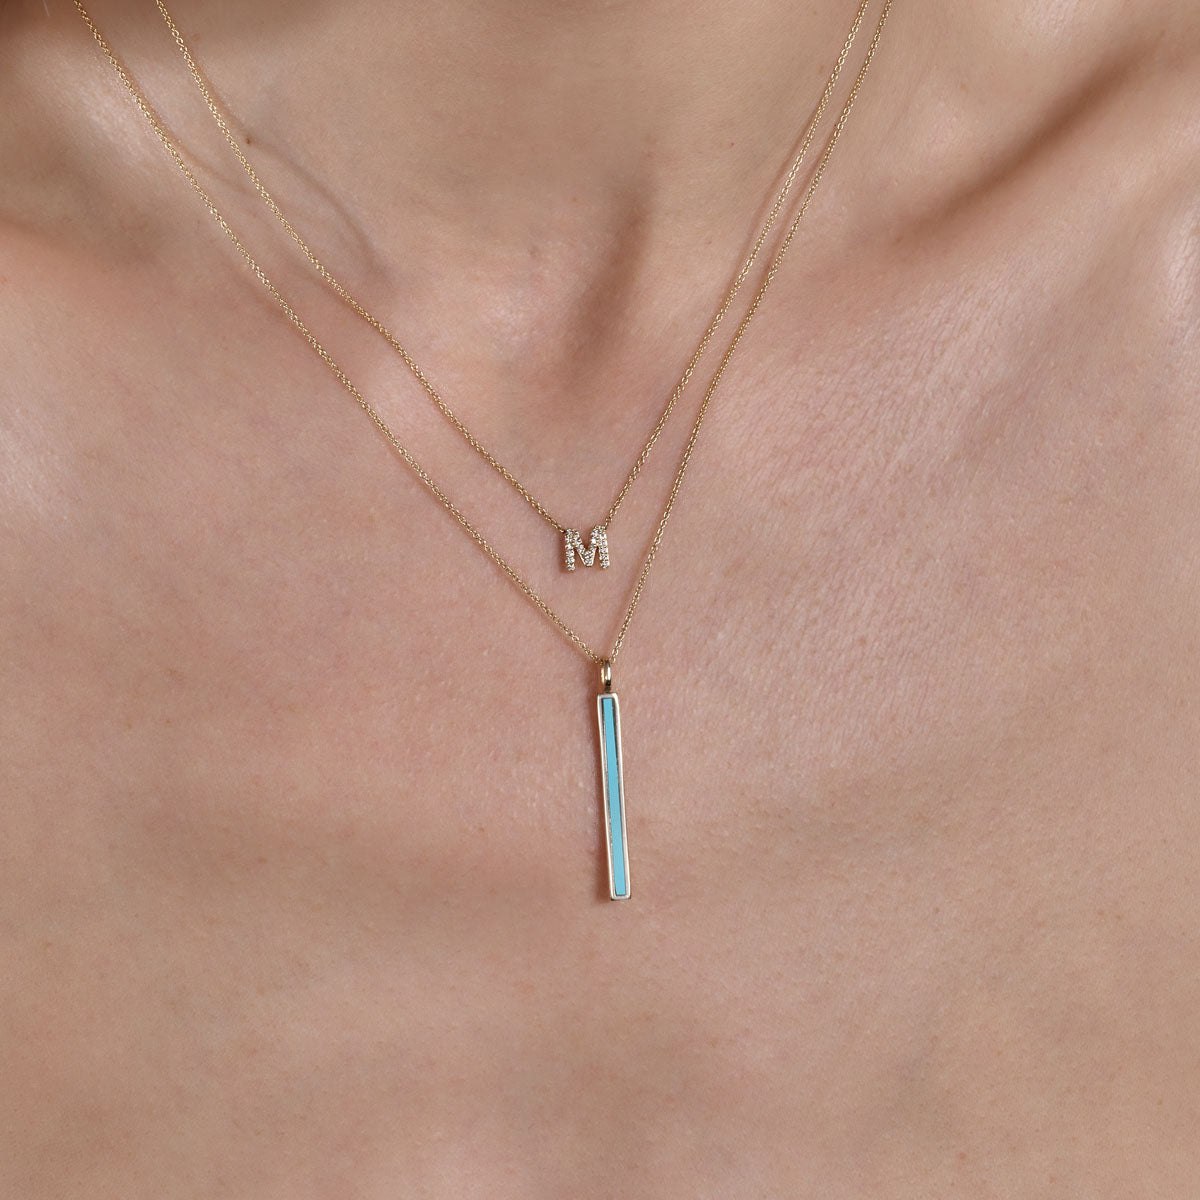 gold diamond 1 letter initial necklace and gold turquoise long bar necklace on models neck